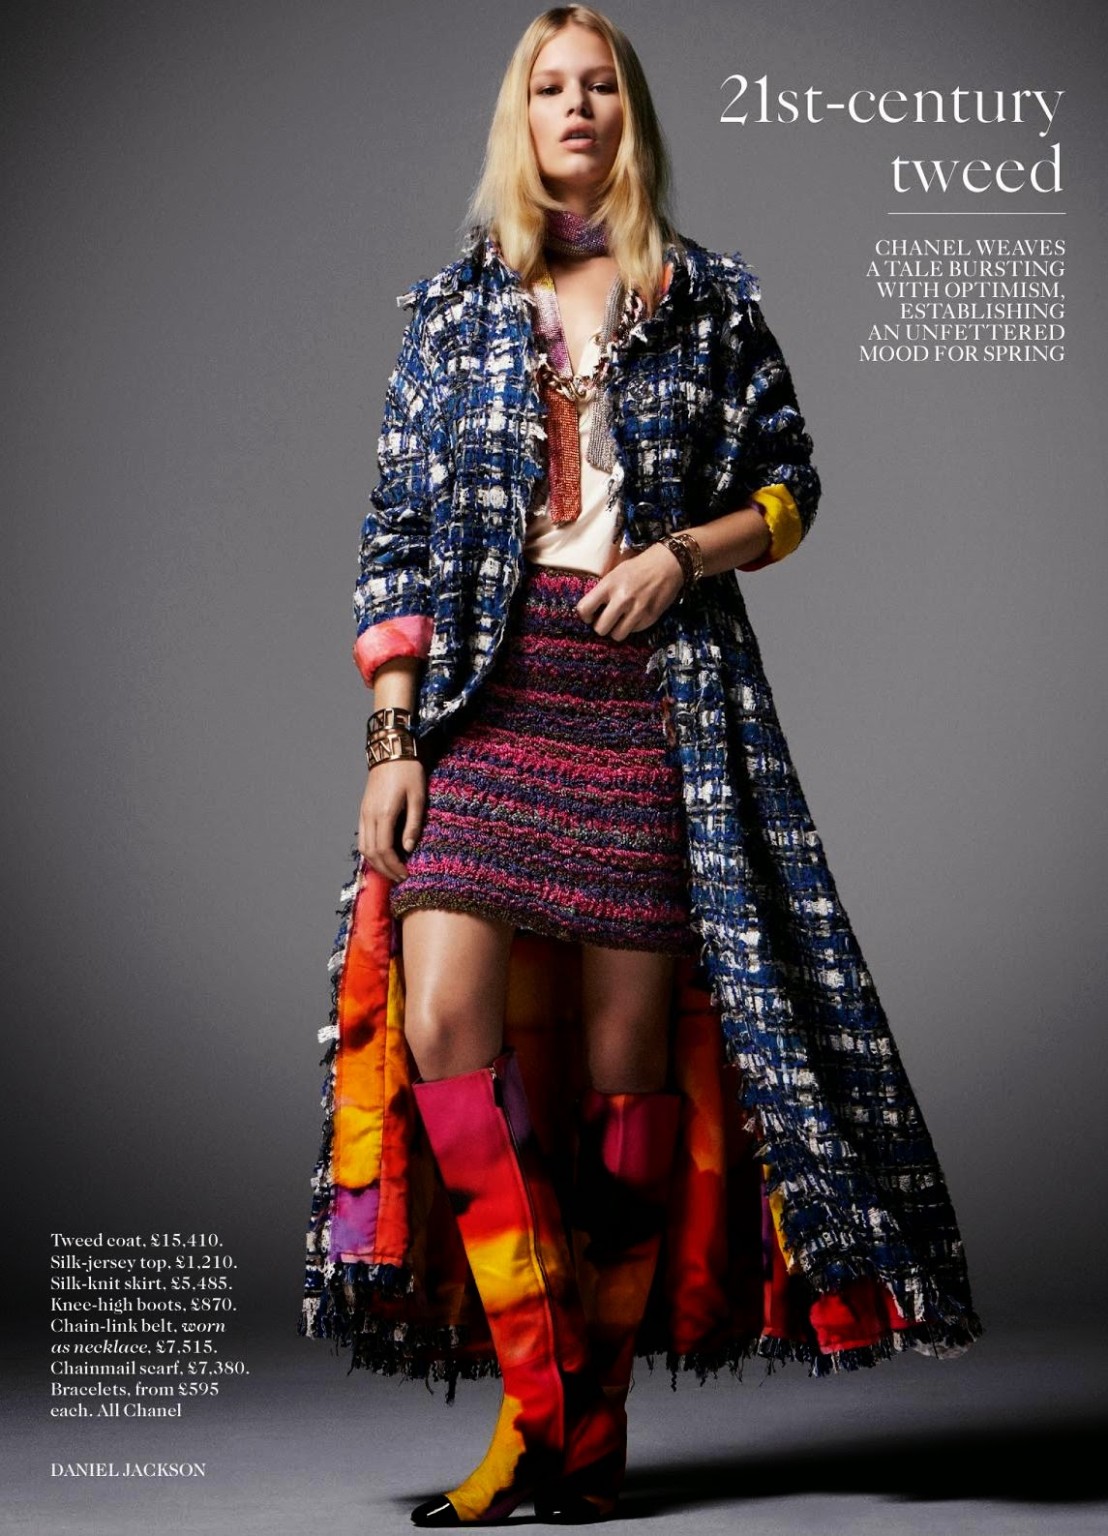 Anna Ewers looking very hot in February 2015 issue of Vogue UK #75175850